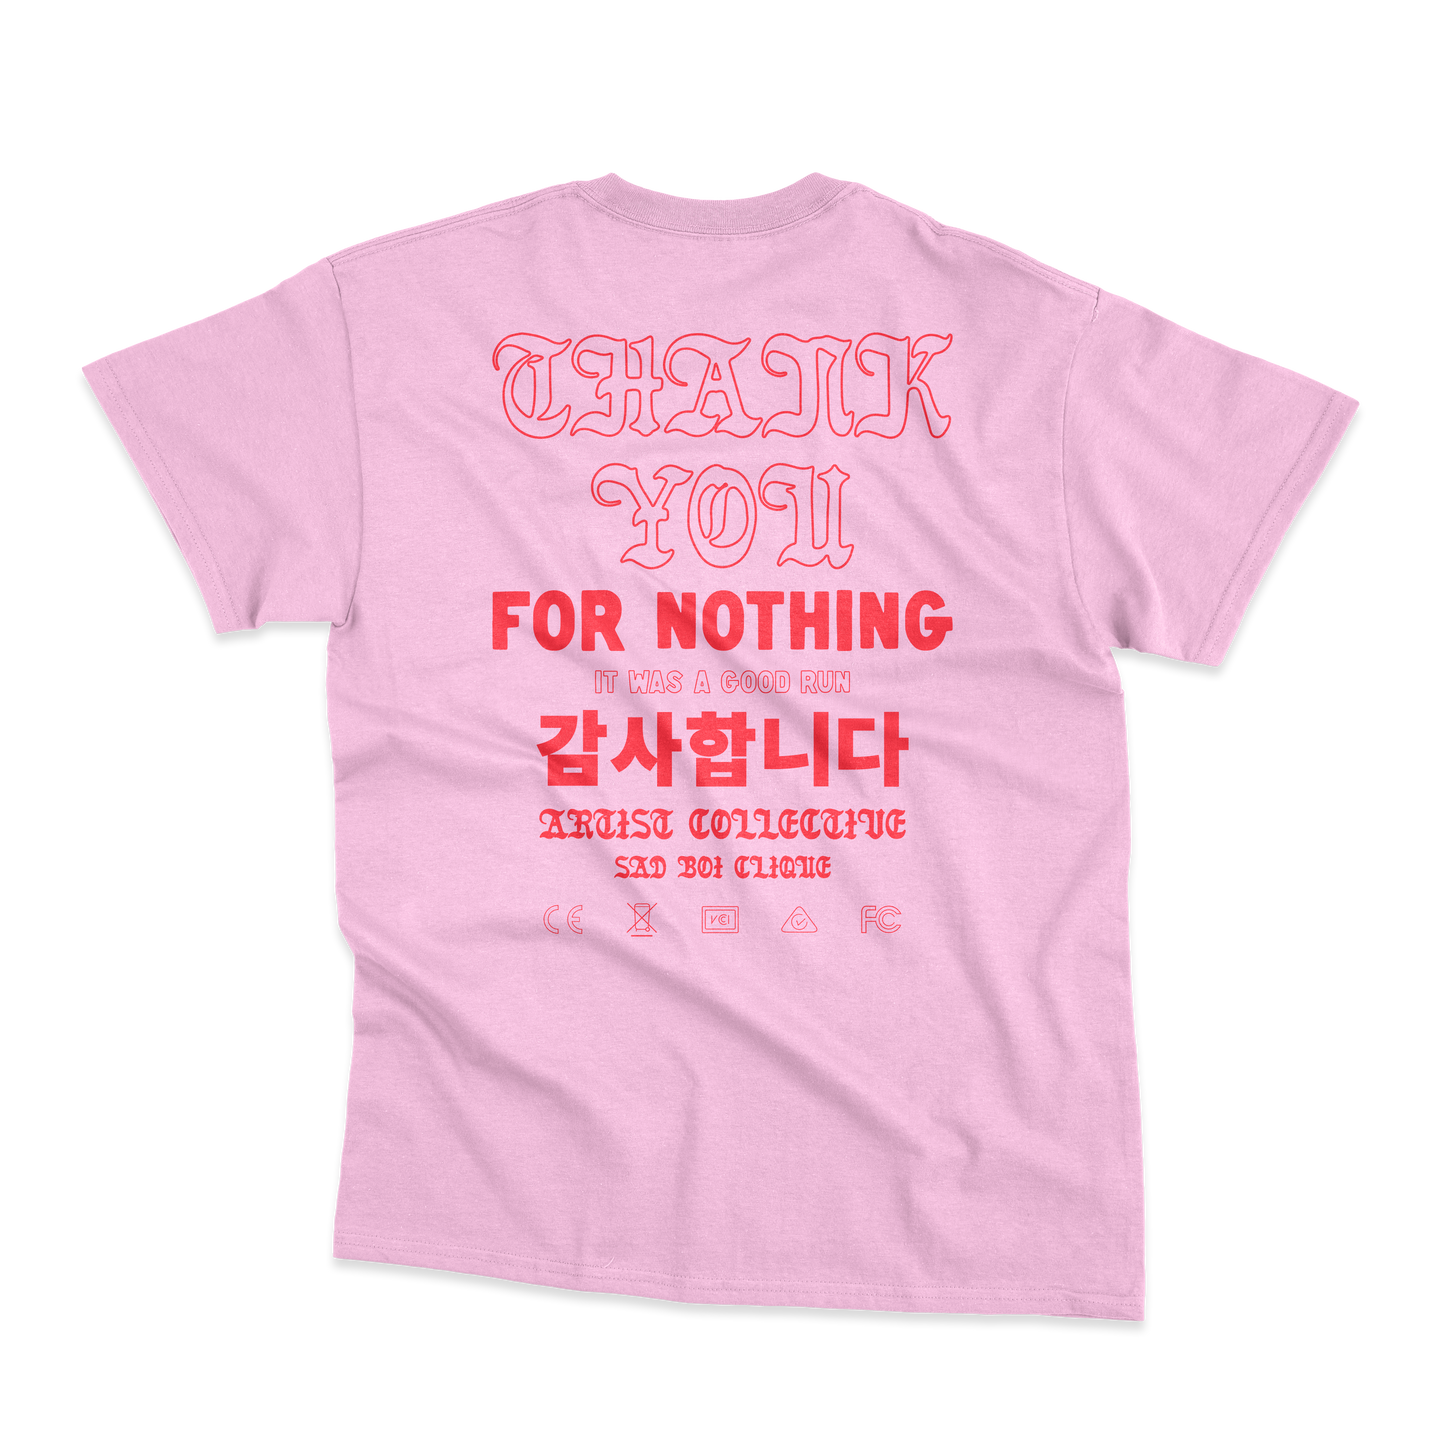 Thank You For Nothing Tee Shirt